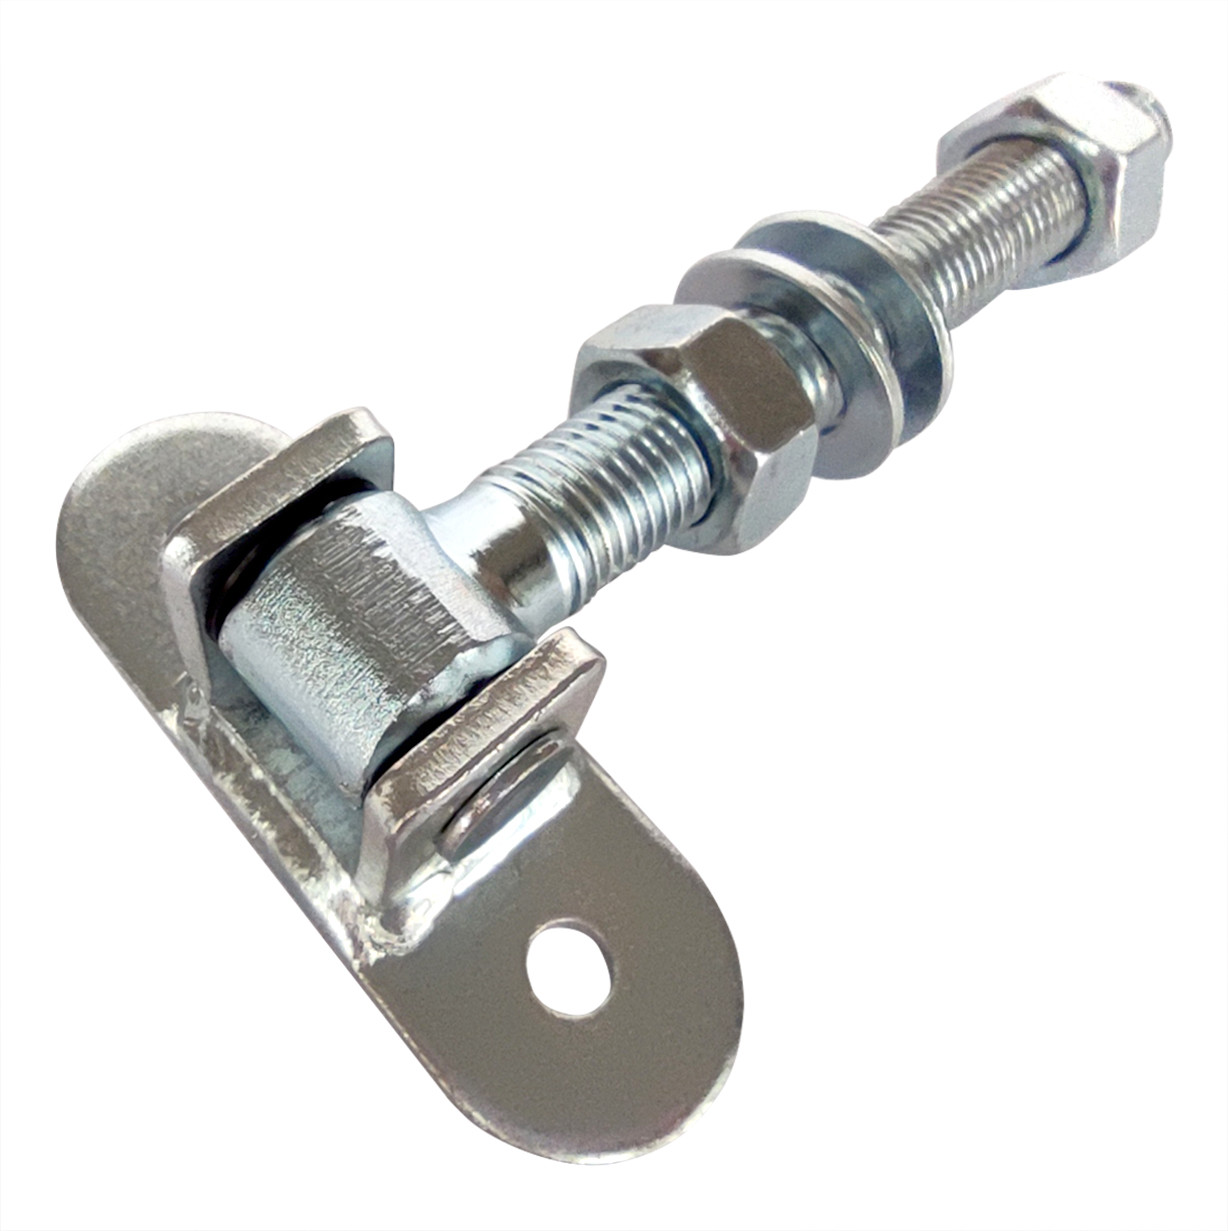  M20 Adjustable Wood Fence Gate Hinge Hardware With Long Bolt Nut White SGS IOS TUV Manufactures